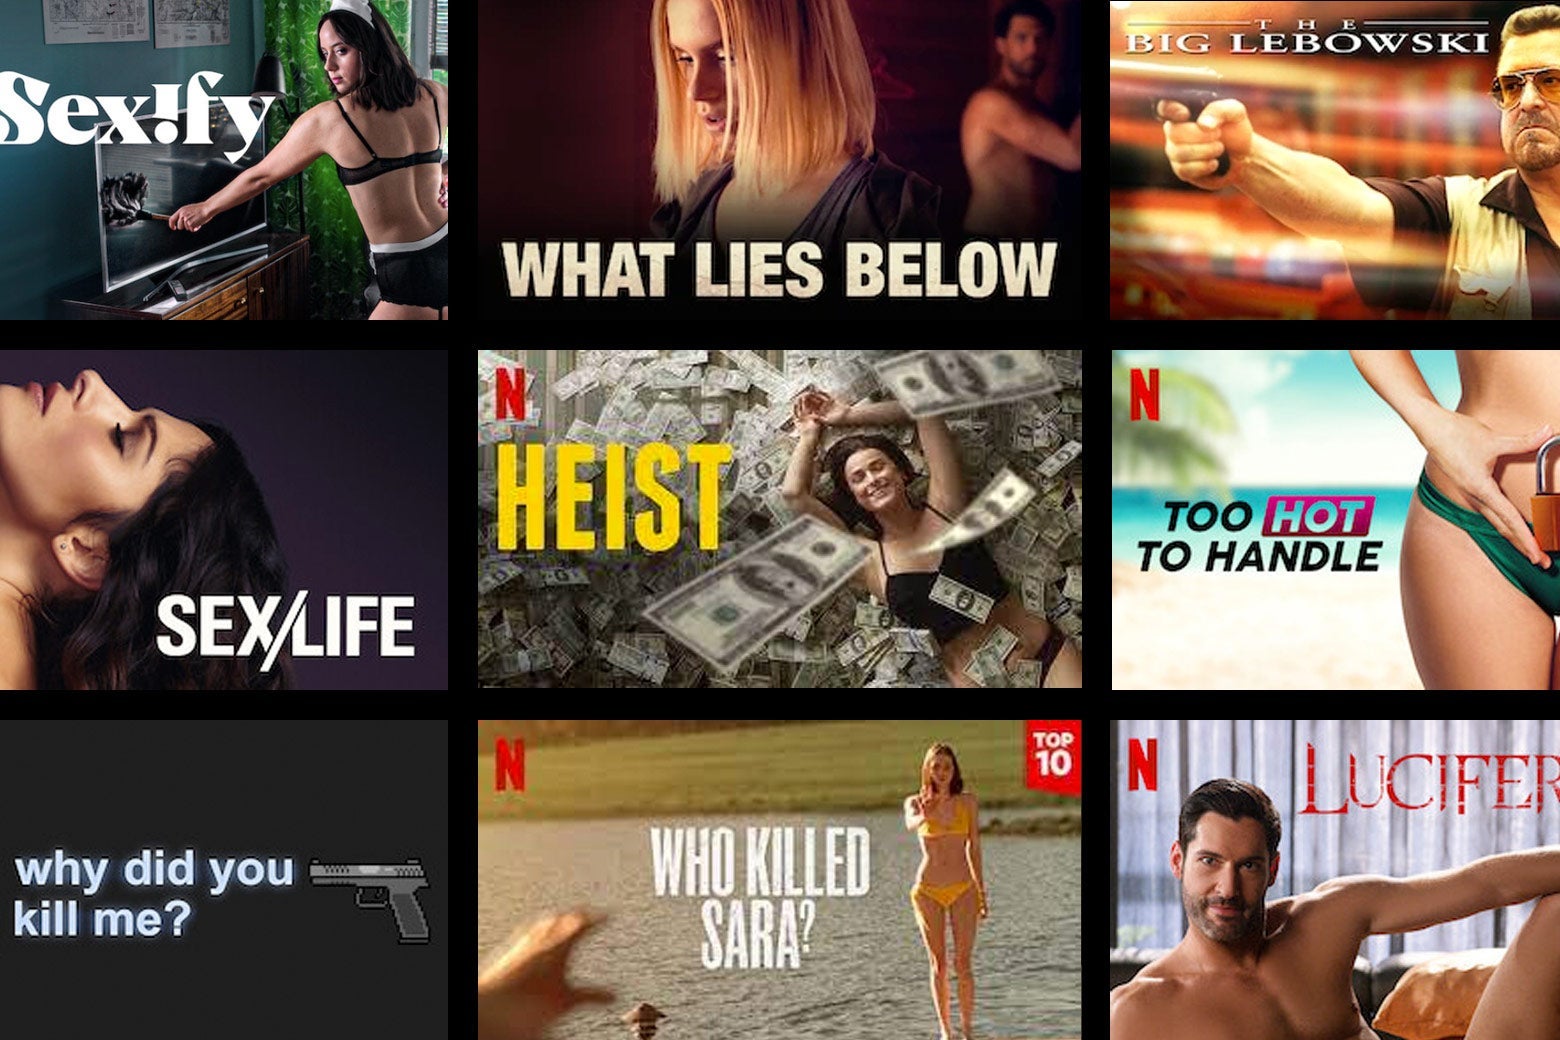 Netflix Top 10 The streaming services clickbait problem threatens to ruin image